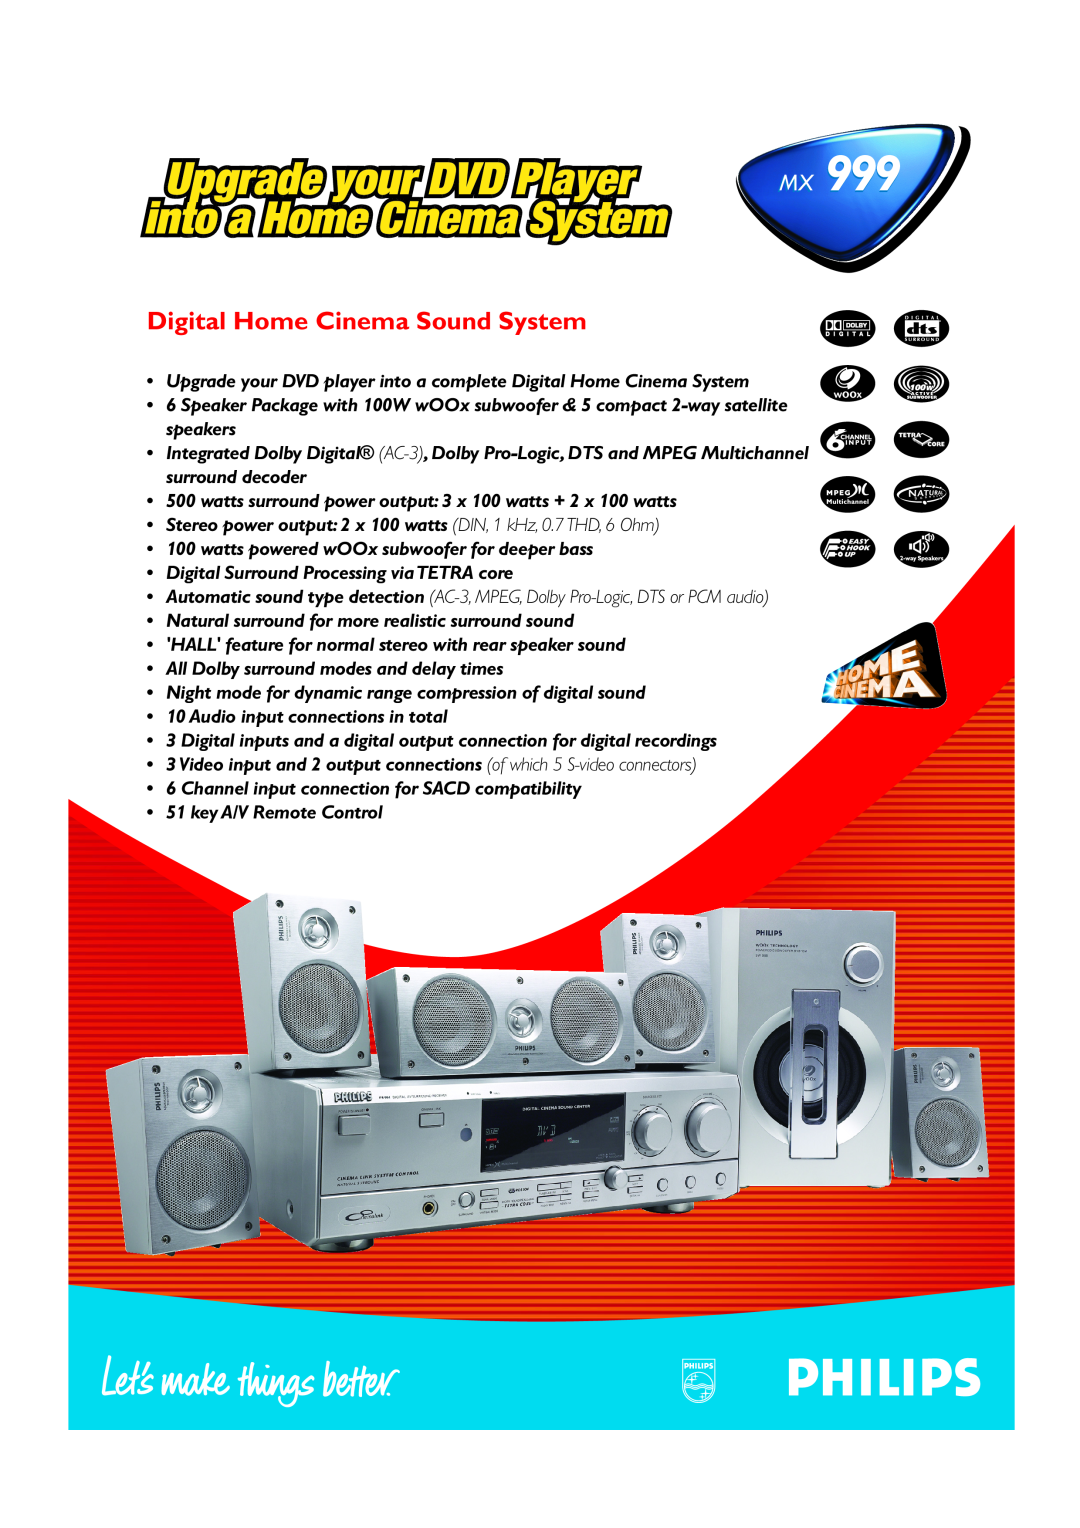 Philips MX999 manual Upgrade your DVD Player, into a Home Cinema System, Digital Home Cinema Sound System 